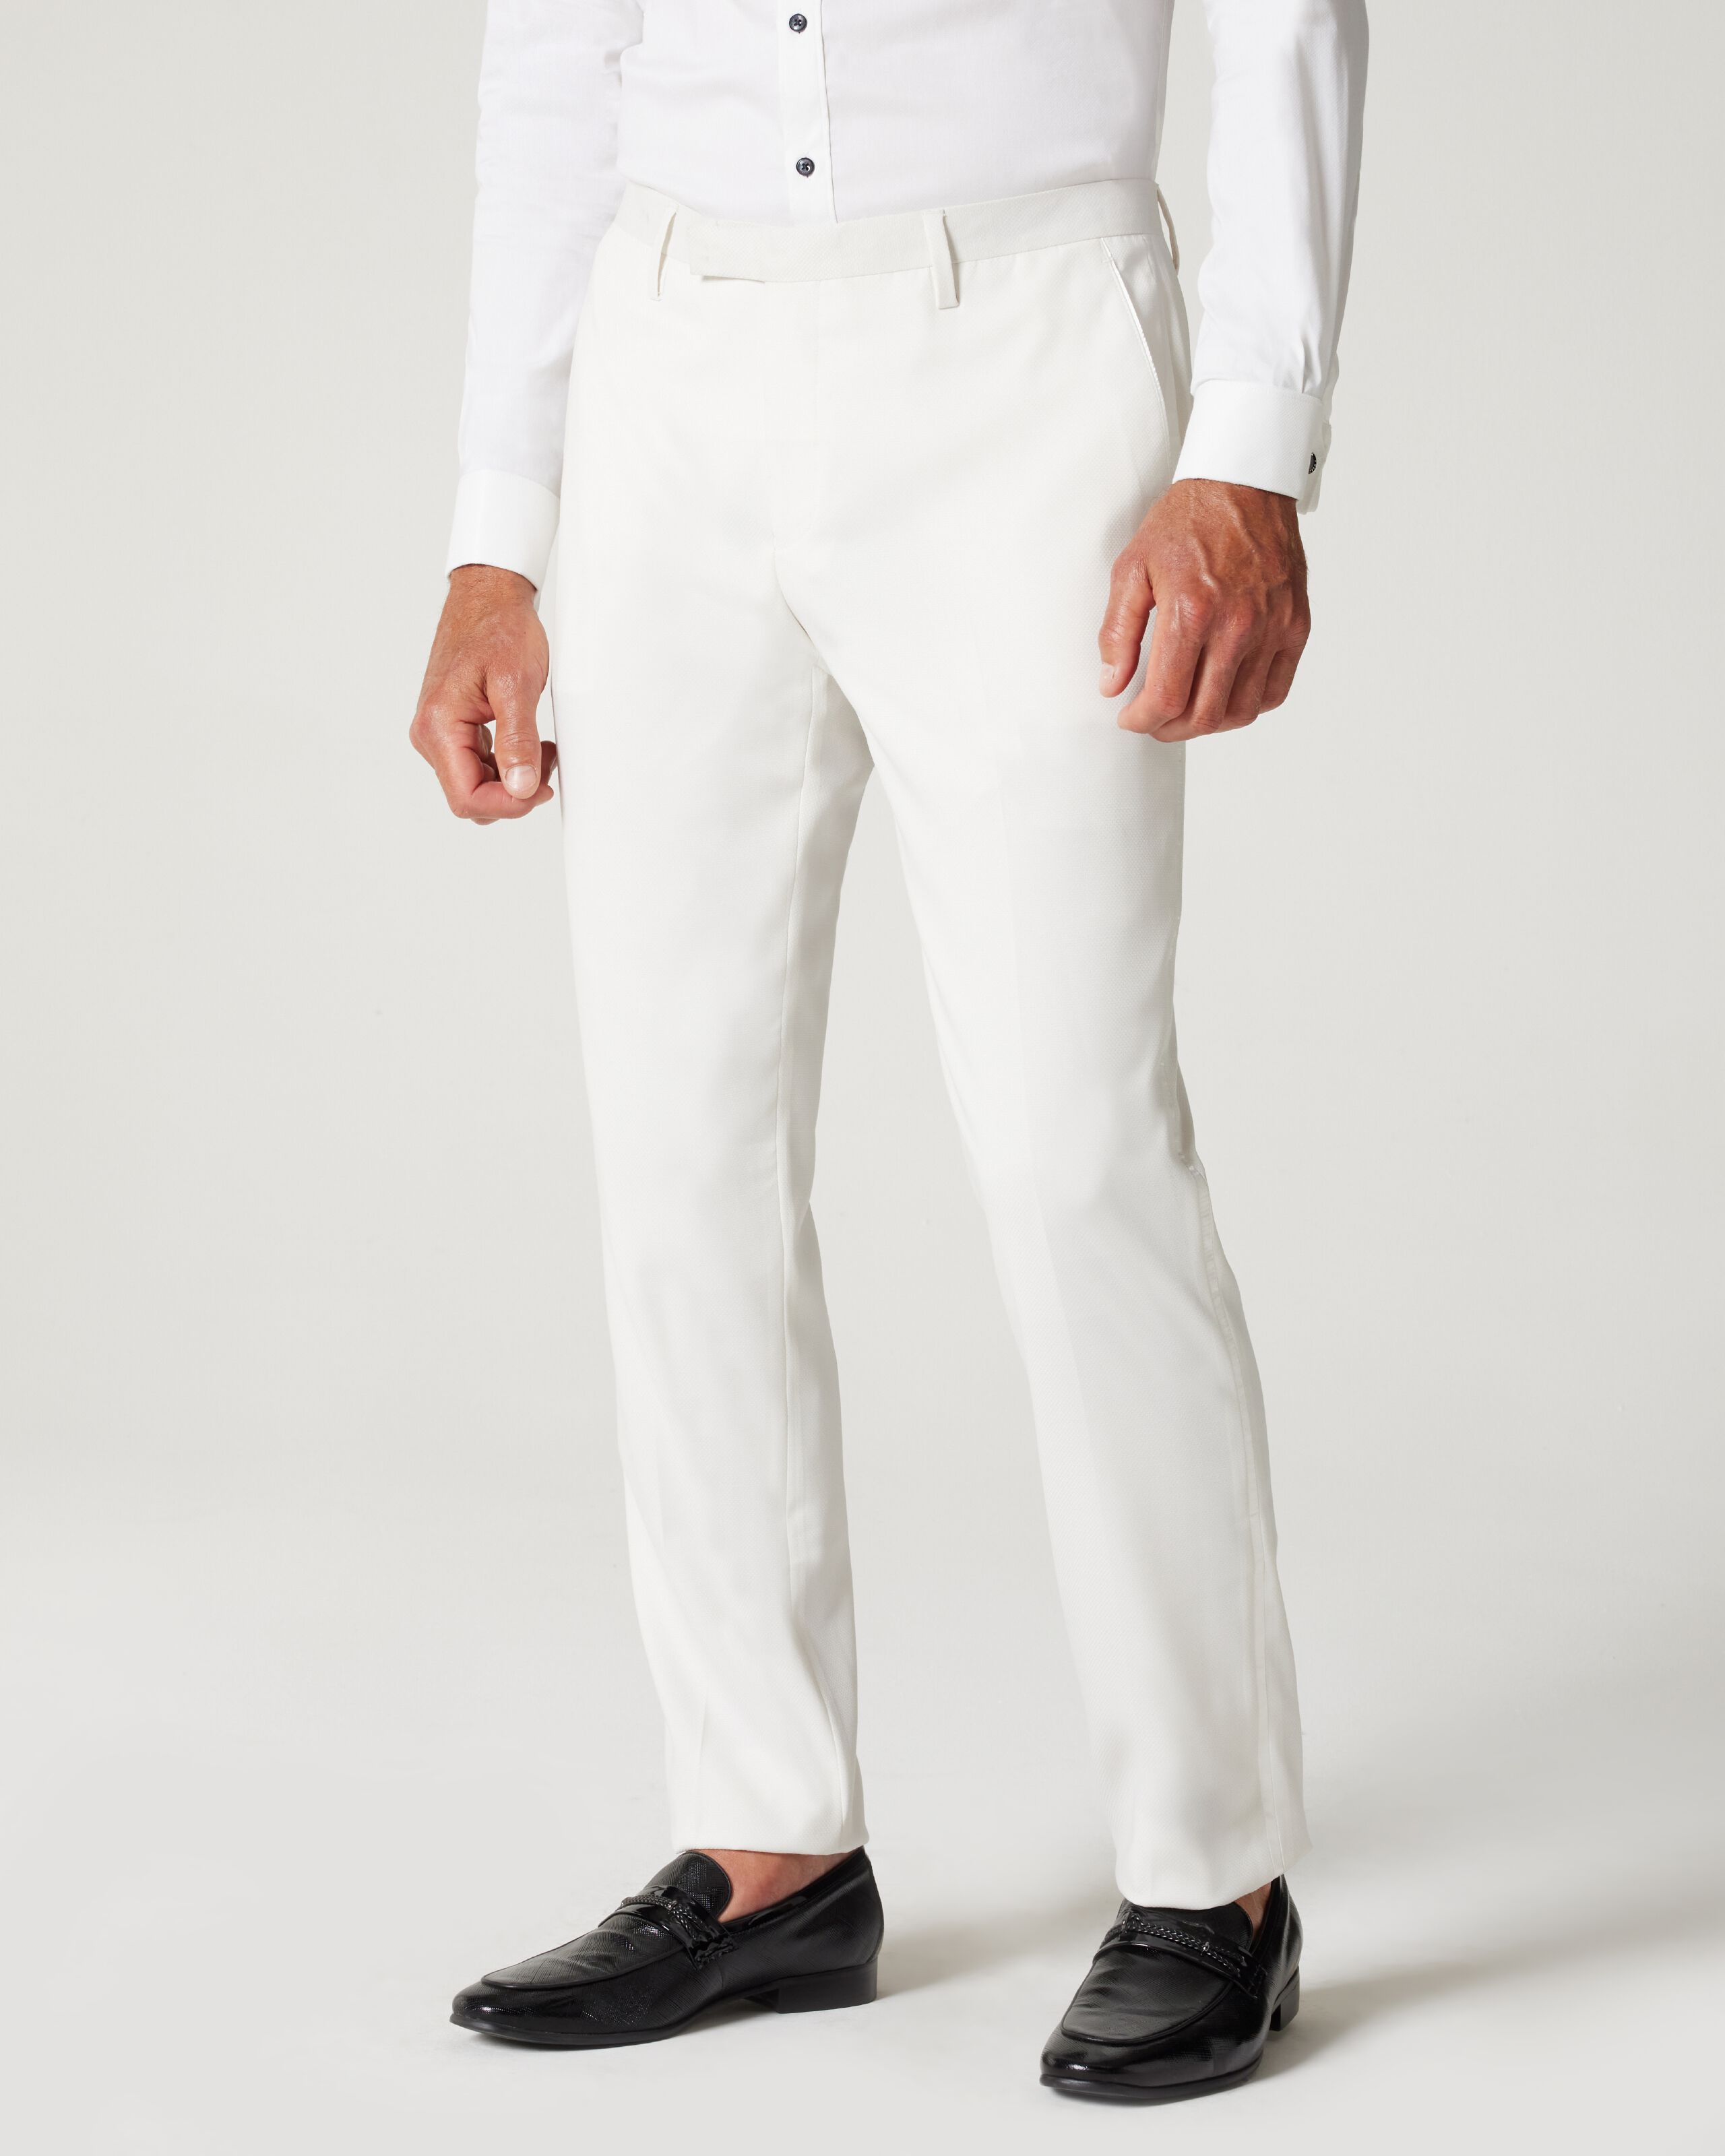 Buy Pollone Navy Tailored Fit Trouser | Zodiac